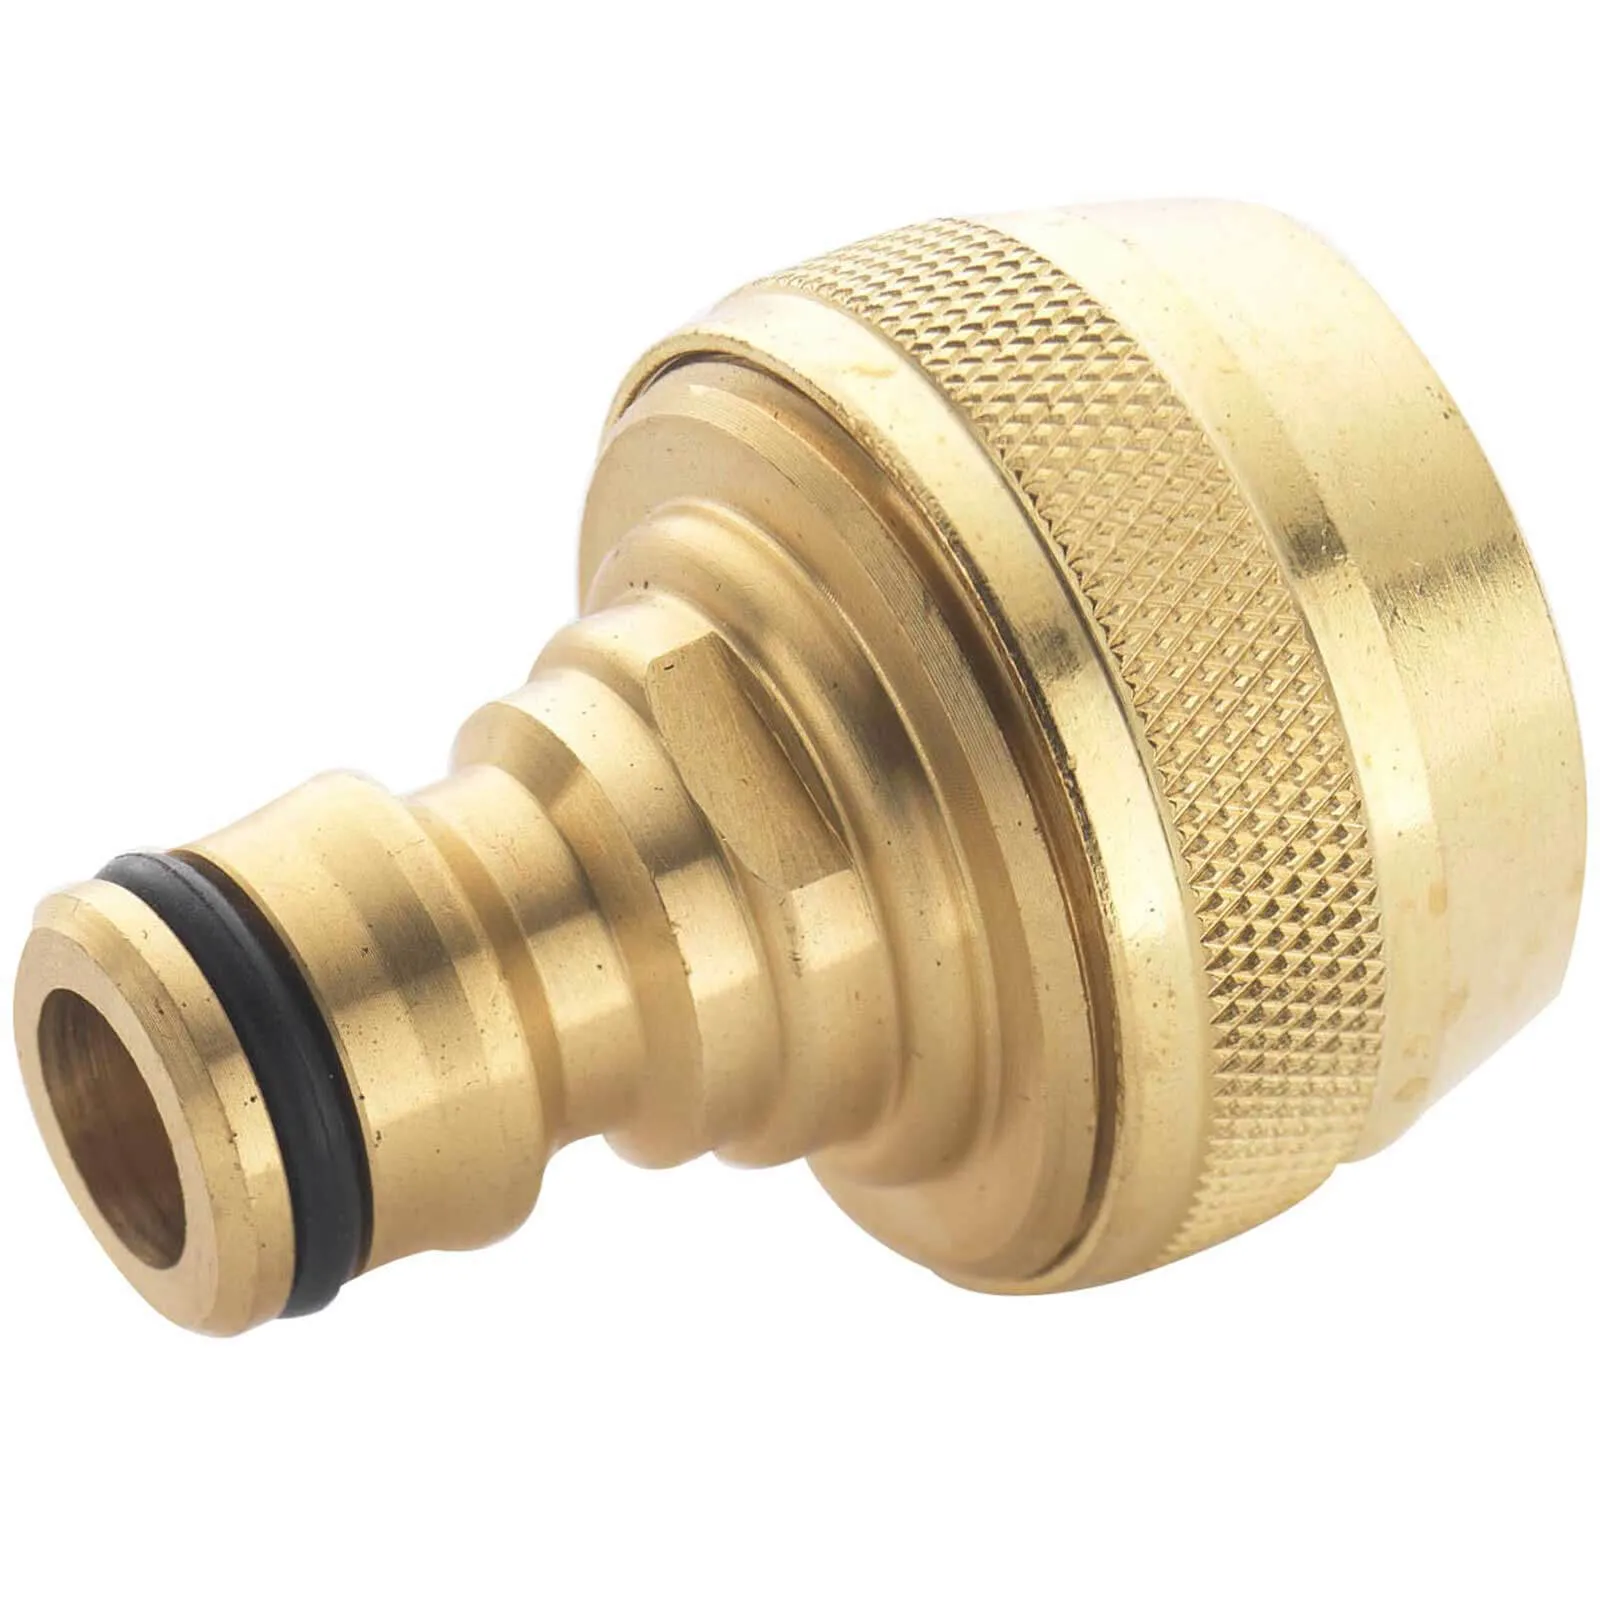 Spear and Jackson Brass Male Hose Connector - 3/4" / 19mm, Pack of 1